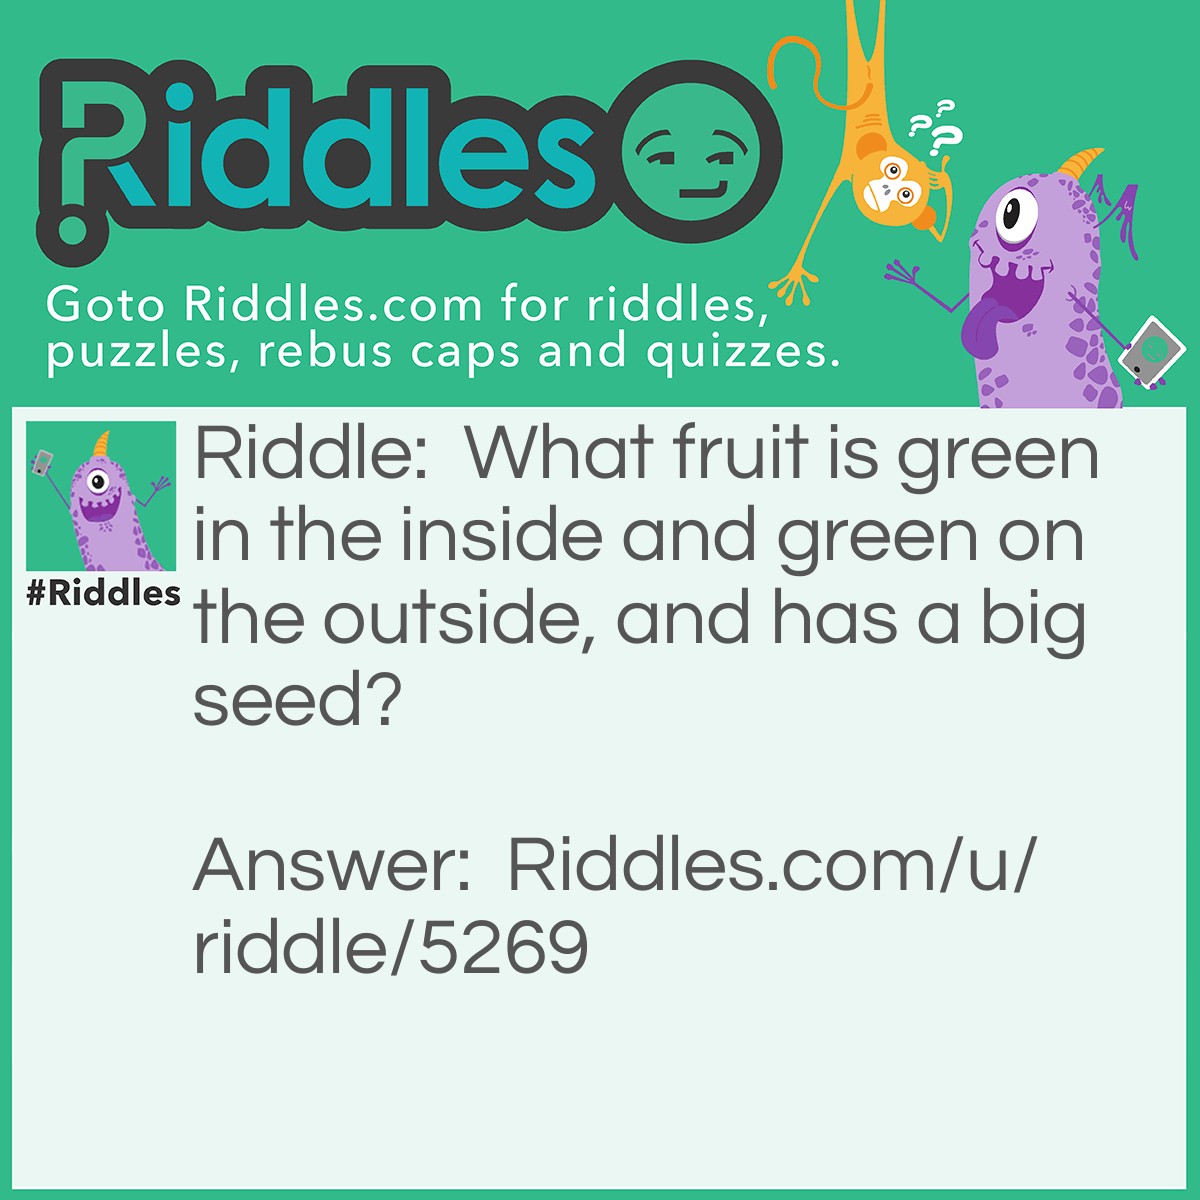 Riddle: What fruit is green in the inside and green on the outside, and has a big seed? Answer: An avocado.